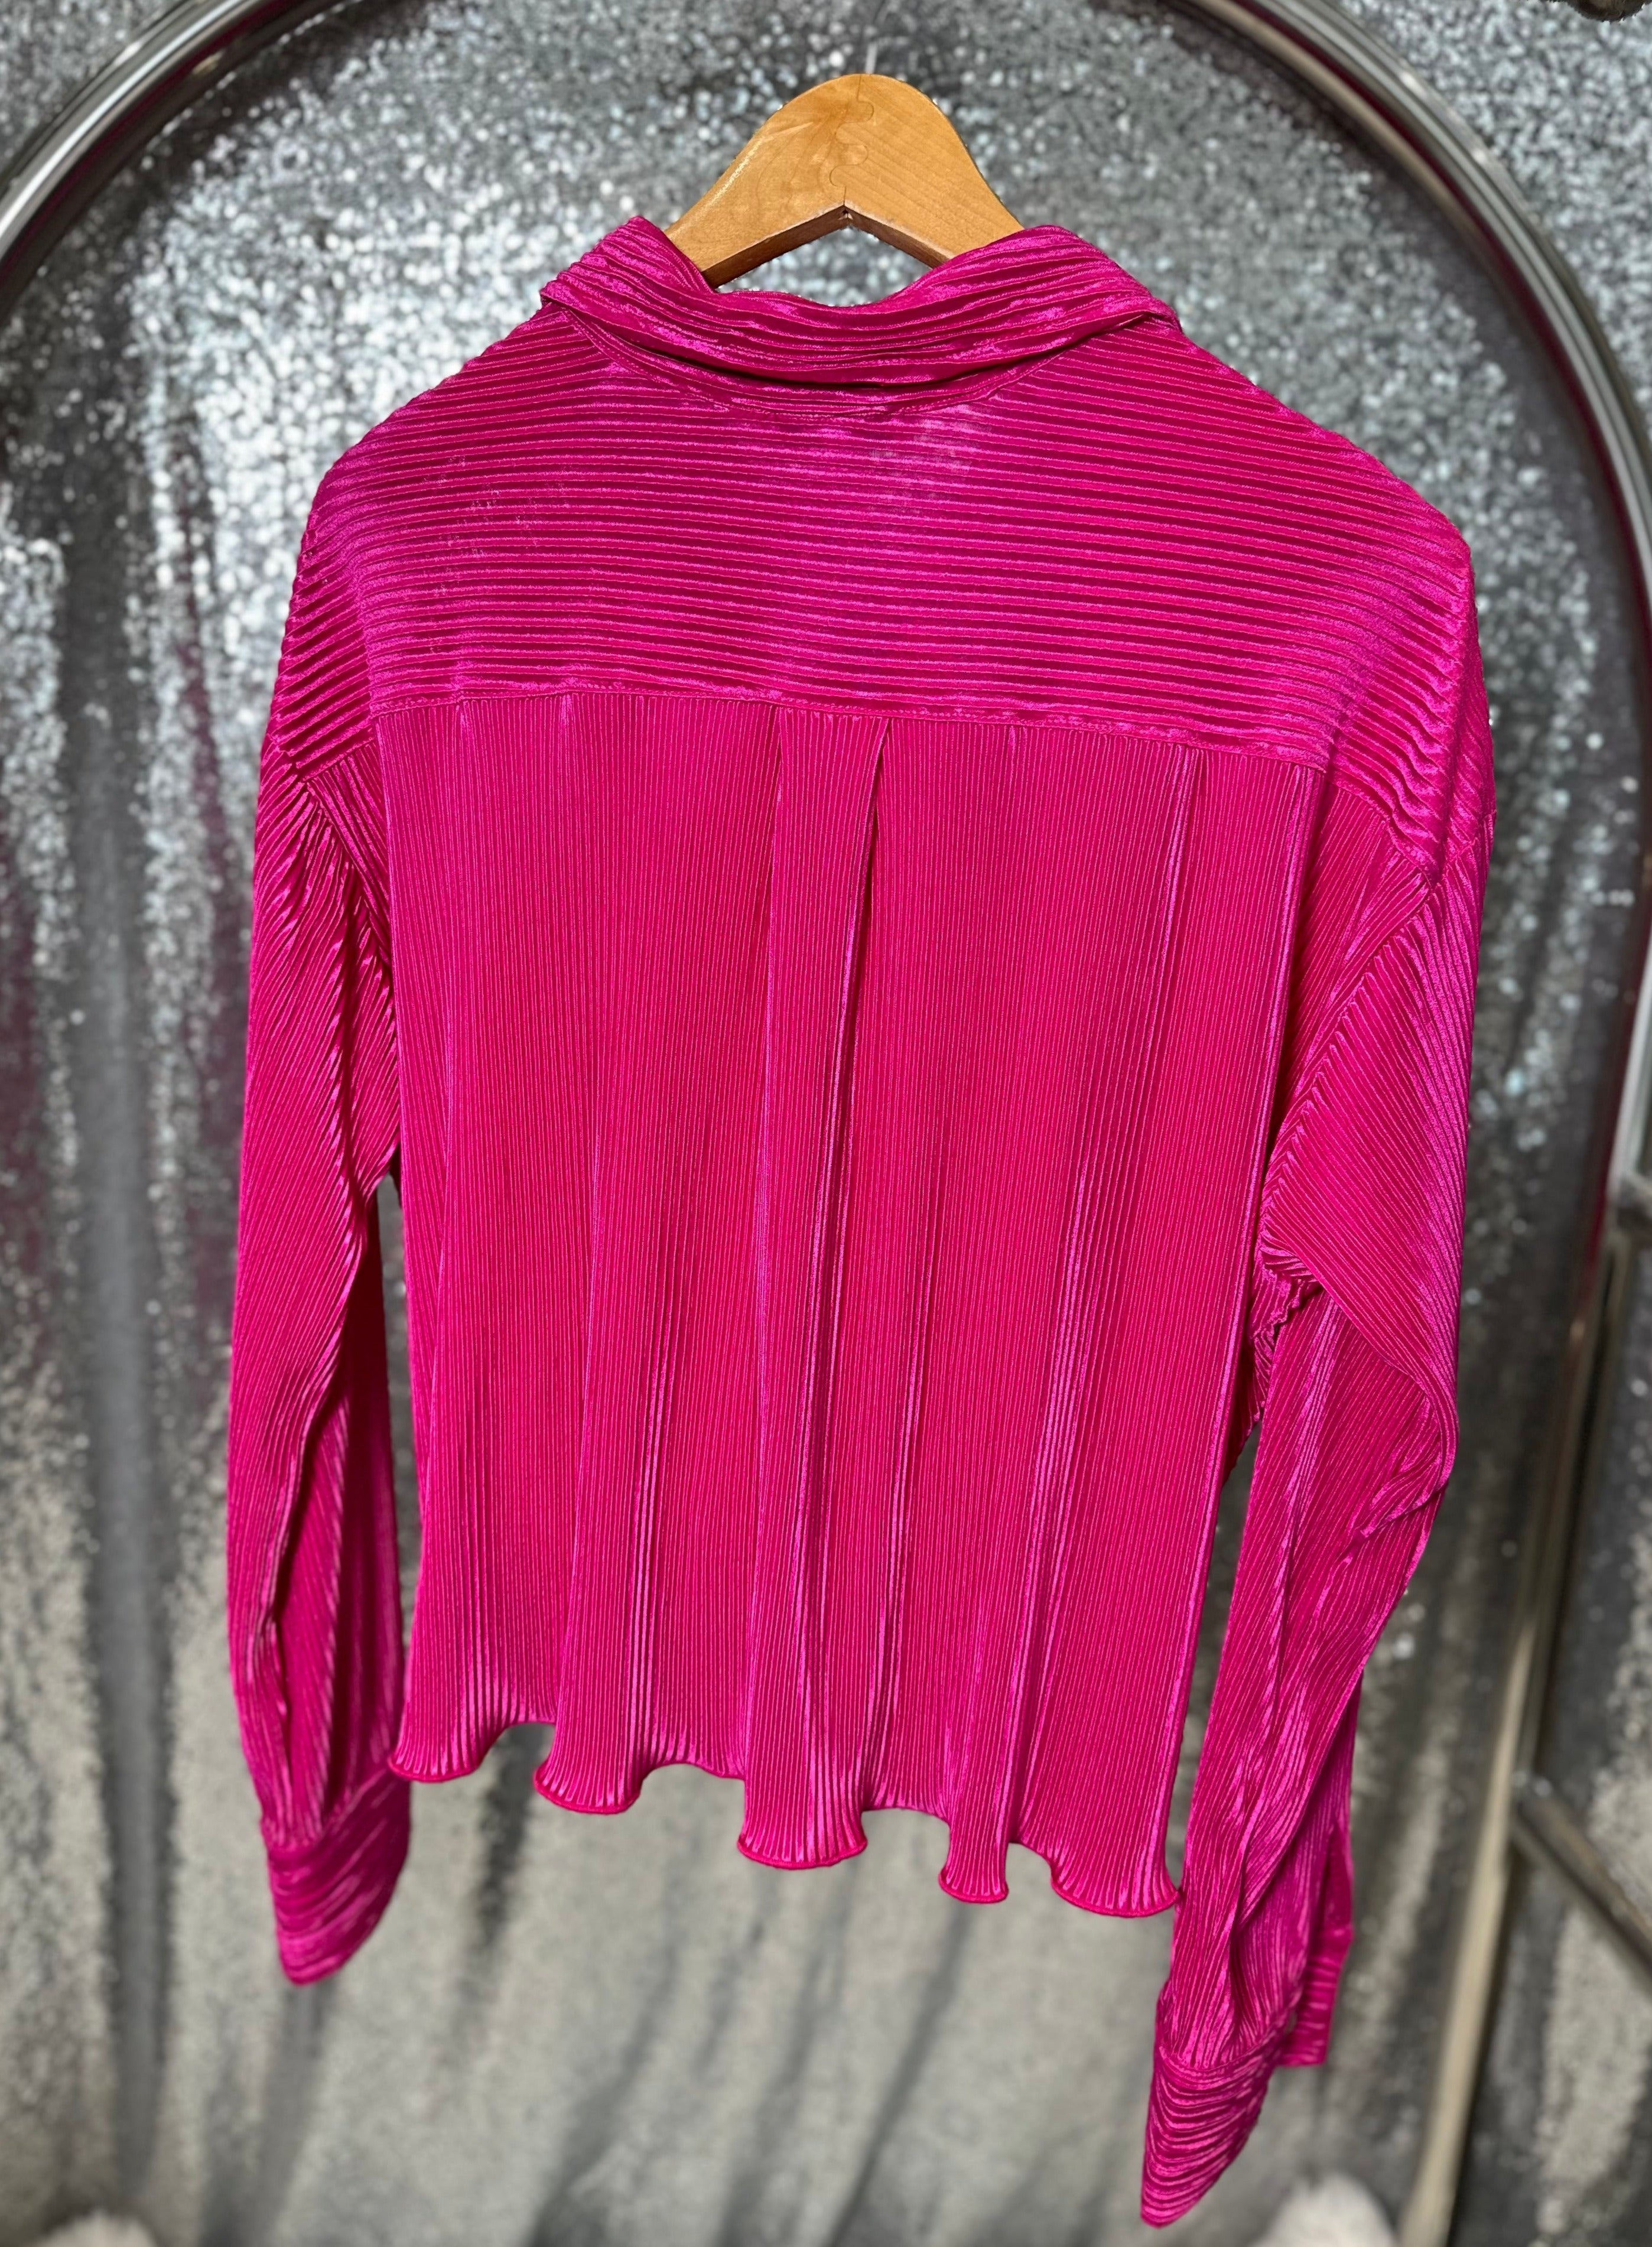 Pink Pleated Top